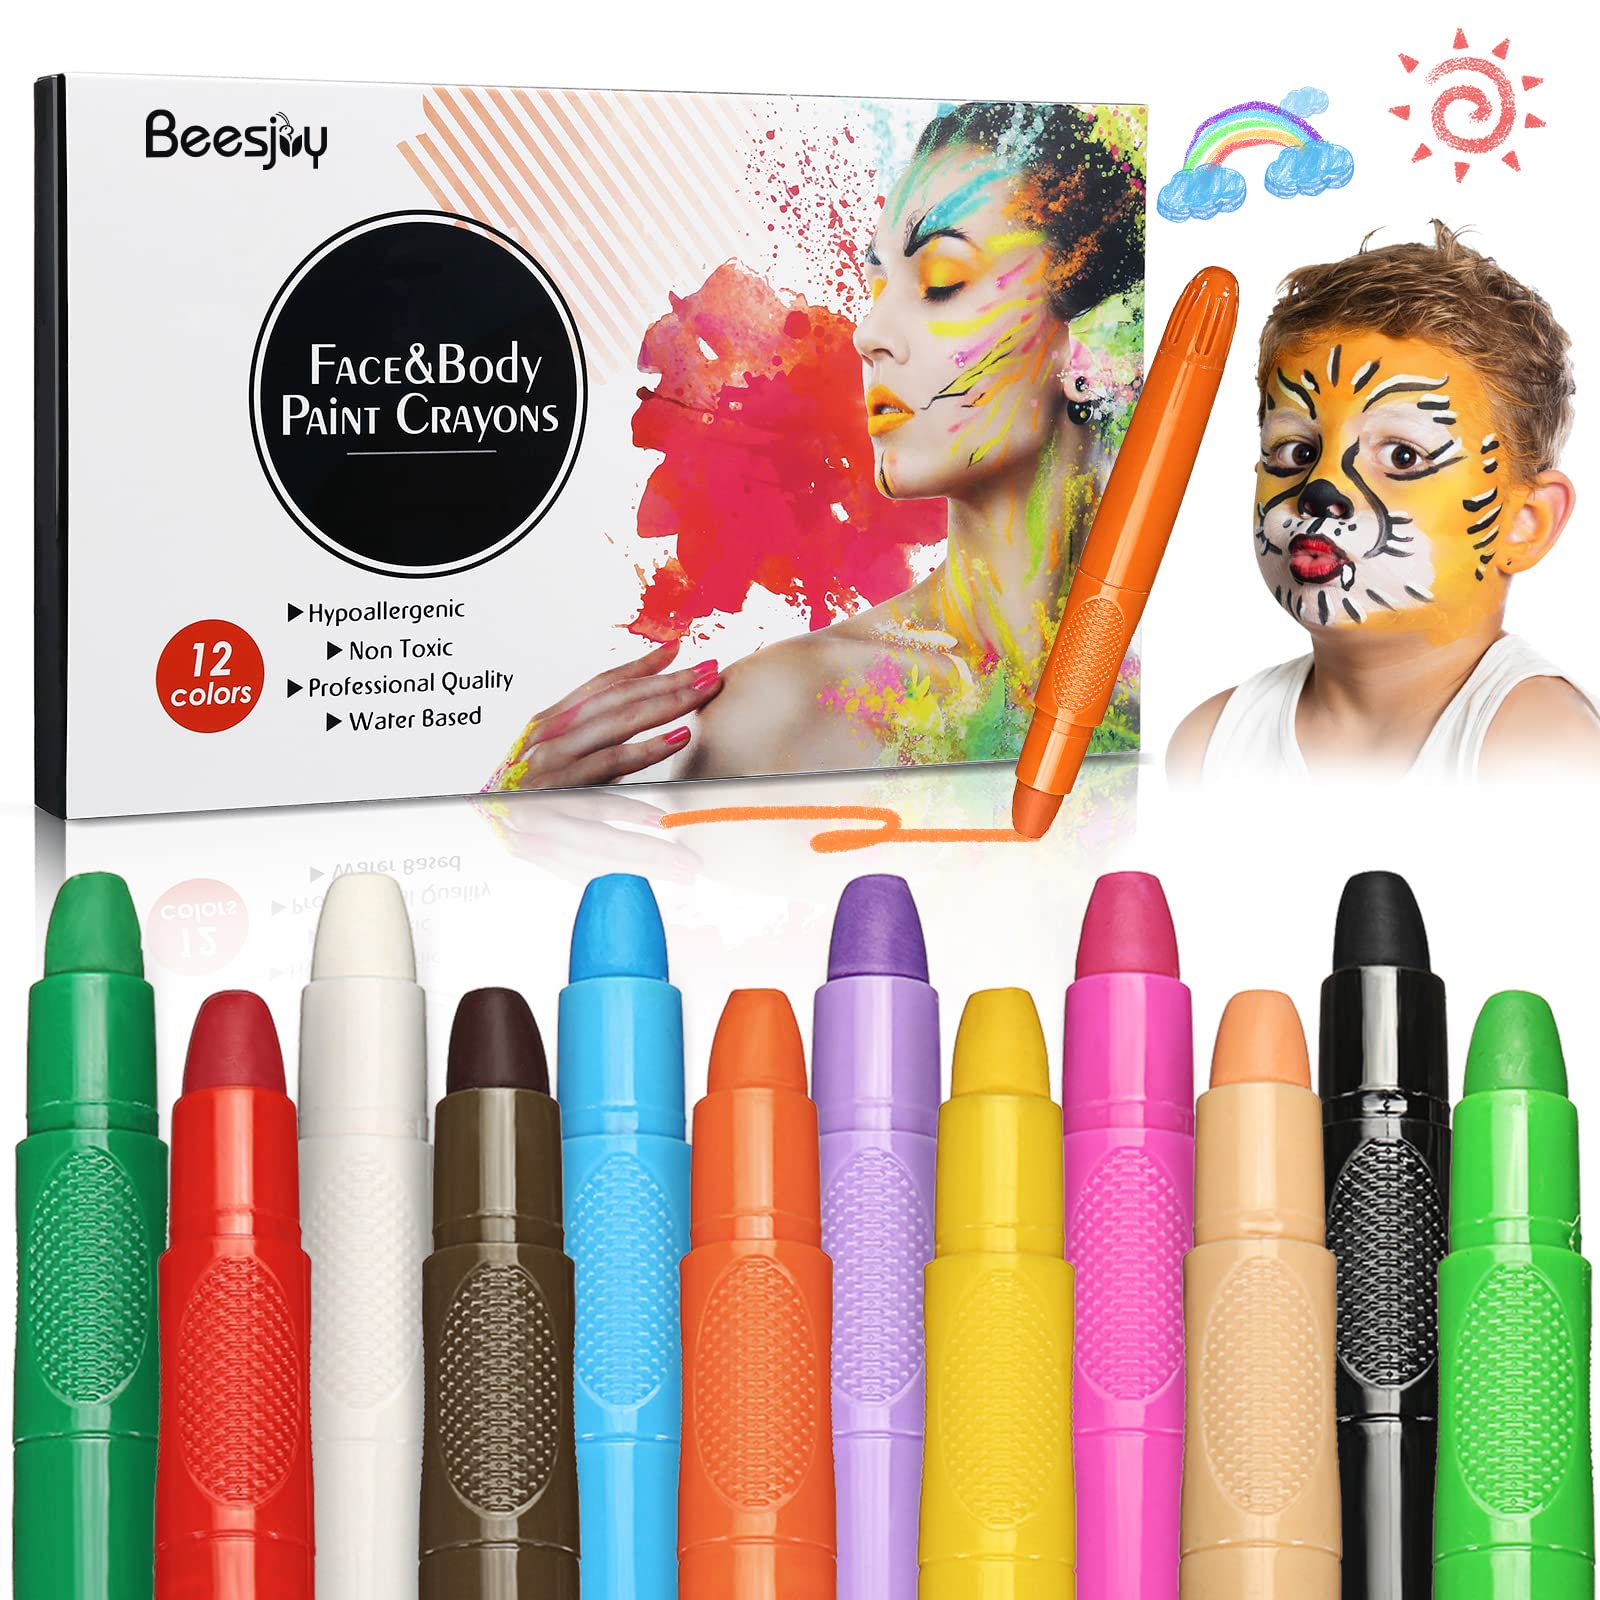 Beesjuy Face Painting Kits for Kids,12 Color Water Based Face